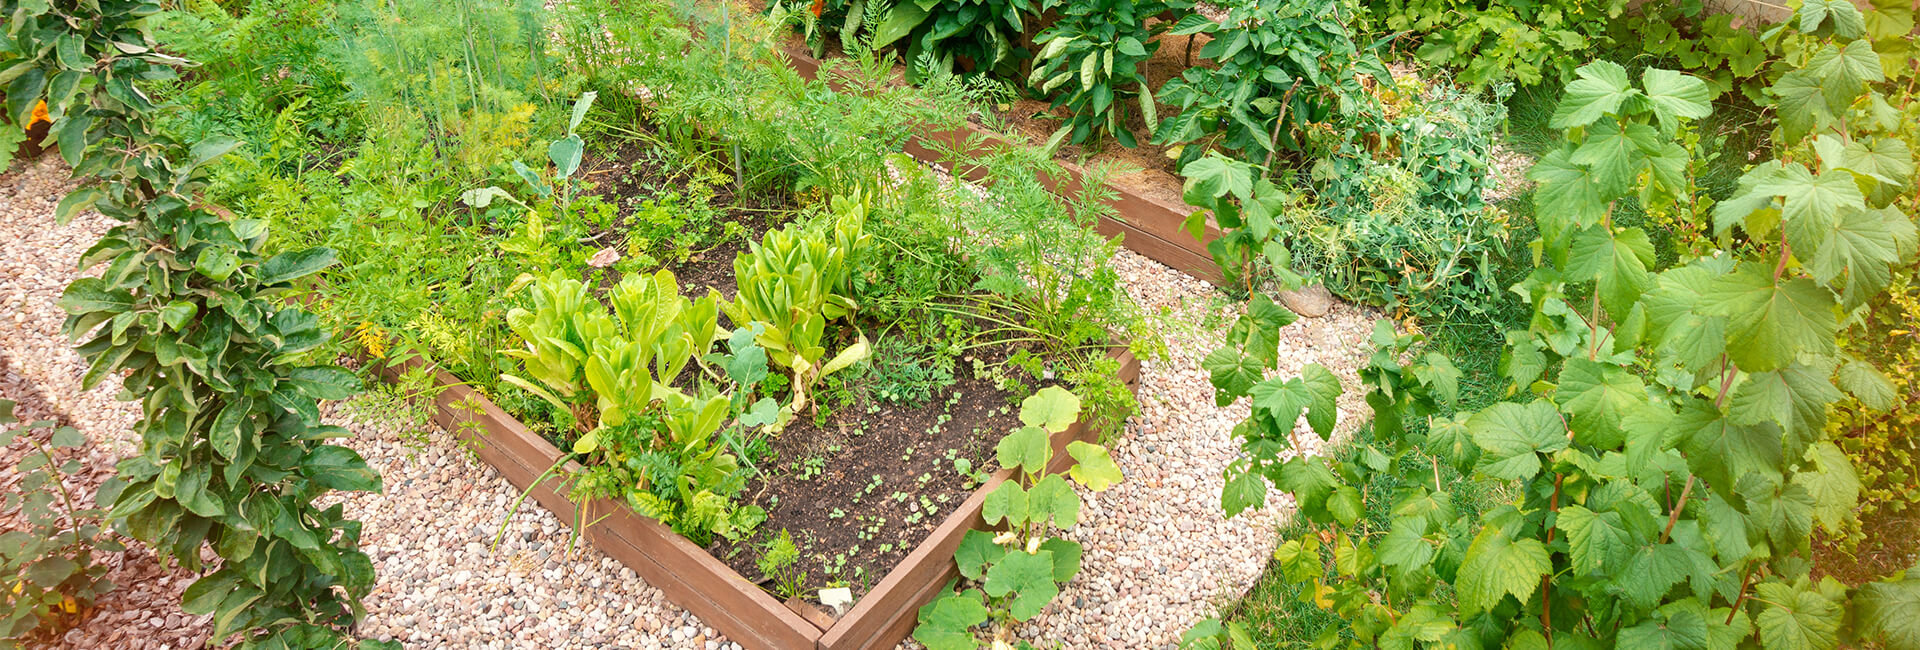 Raised garden bed made from wood